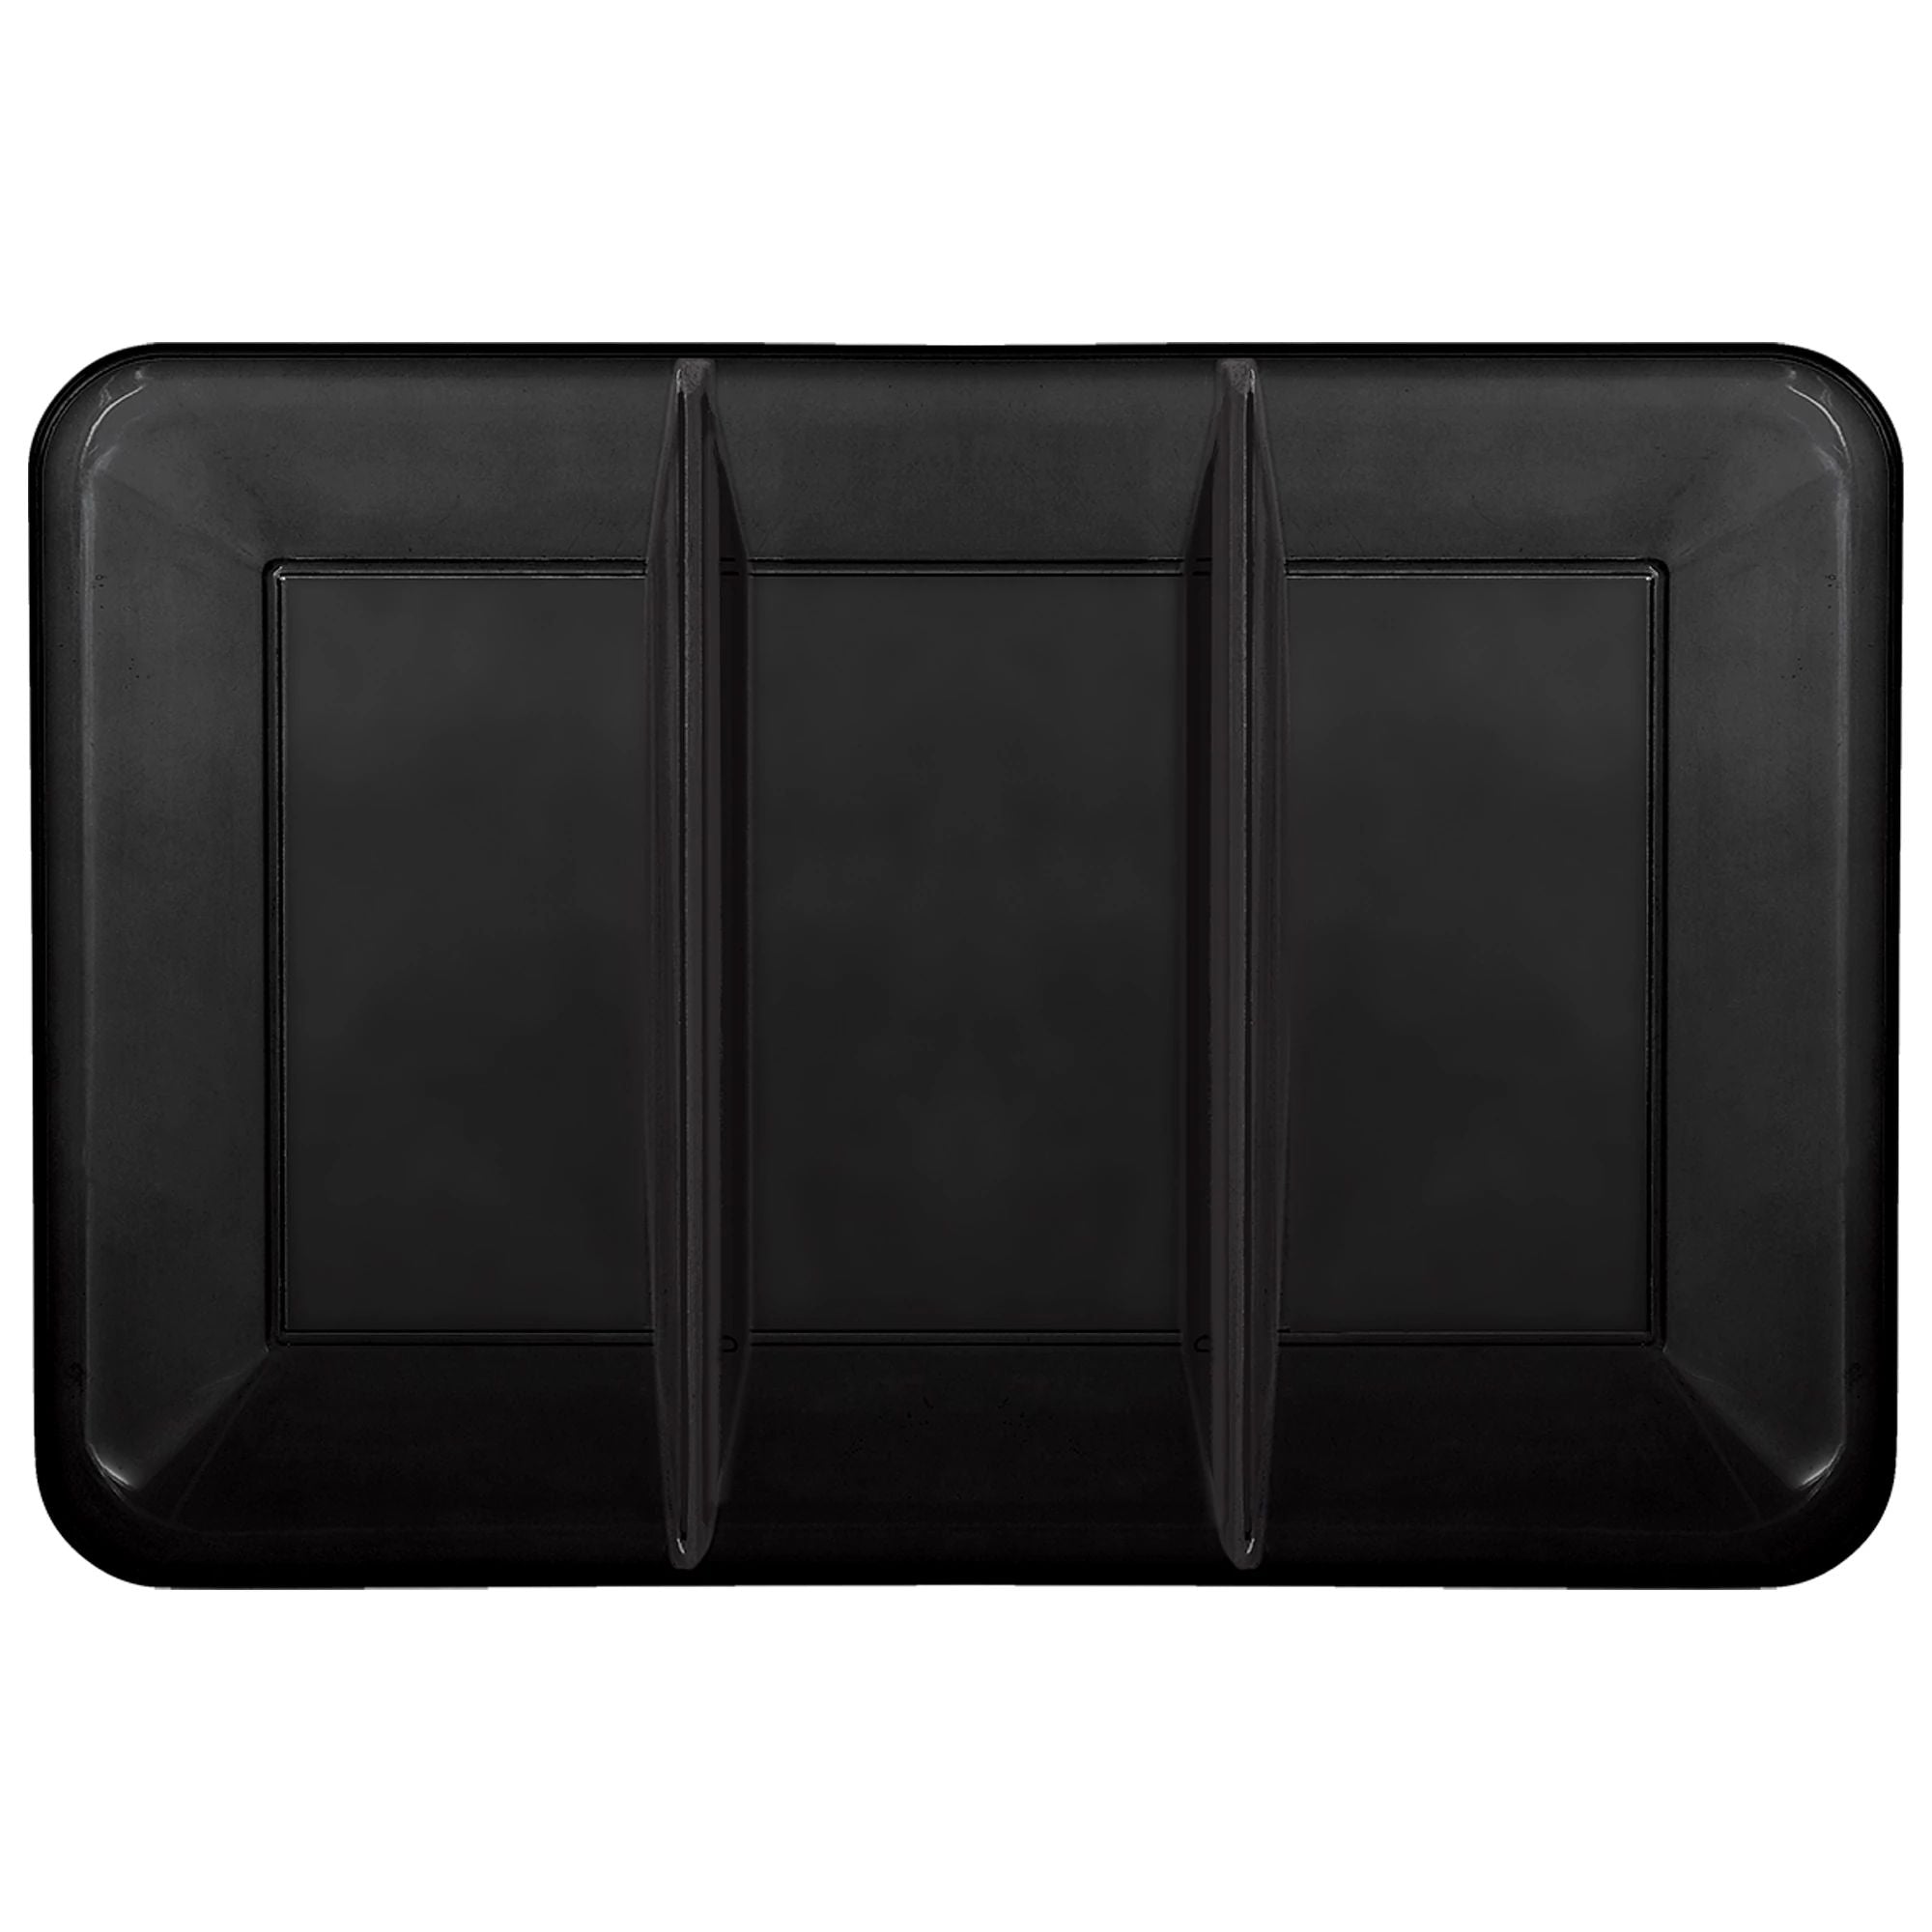 Compartment Tray, Recyclable - Black